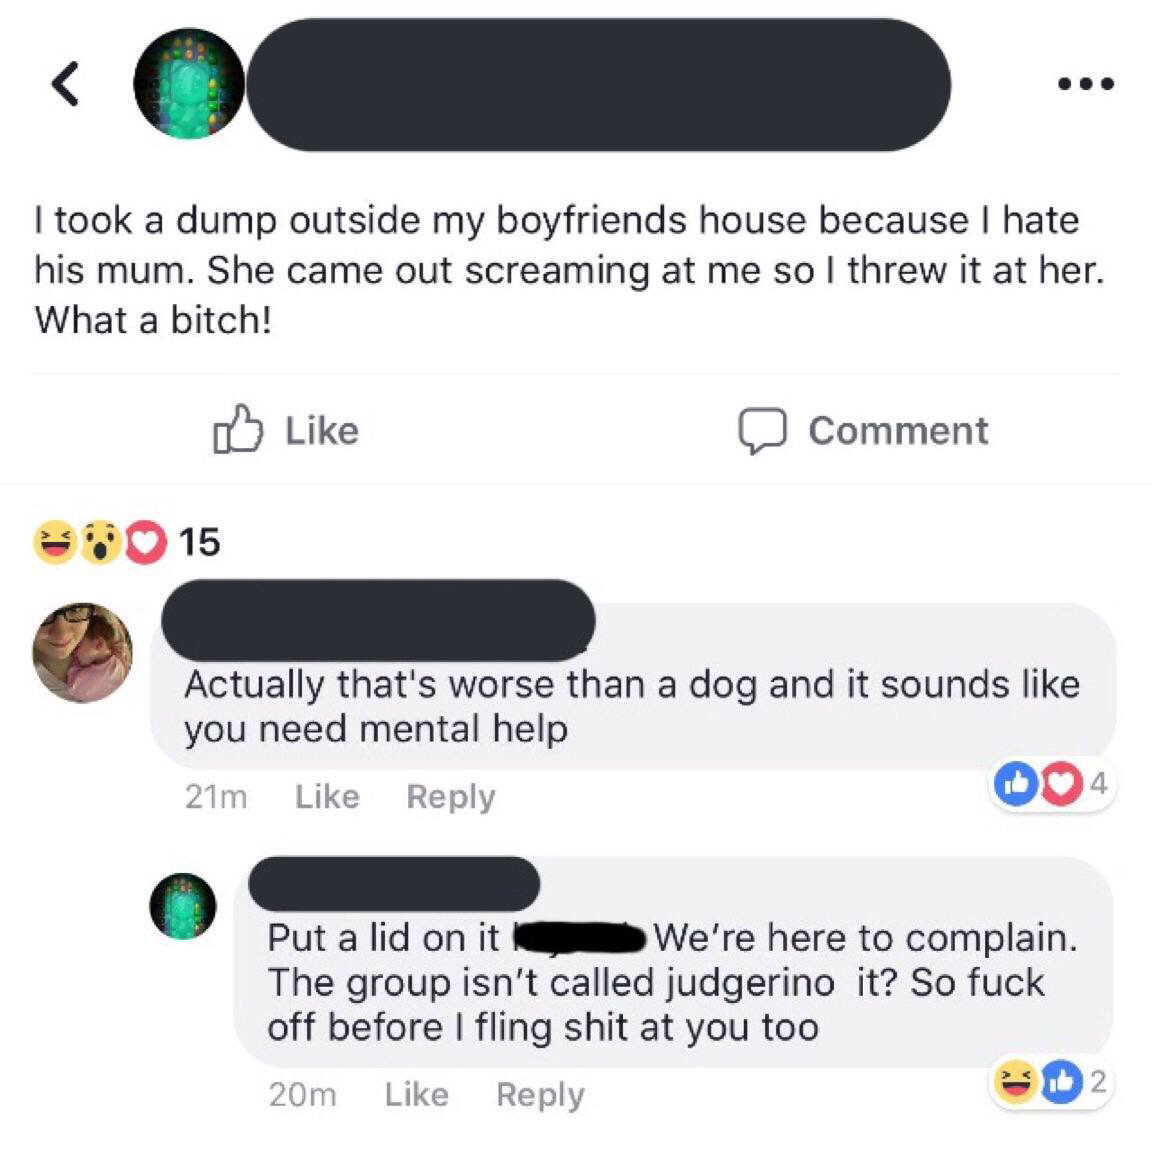 web page - I took a dump outside my boyfriends house because I hate his mum. She came out screaming at me so I threw it at her. What a bitch! Comment 3 15 Actually that's worse than a dog and it sounds you need mental help 21m Put a lid on it We're here t